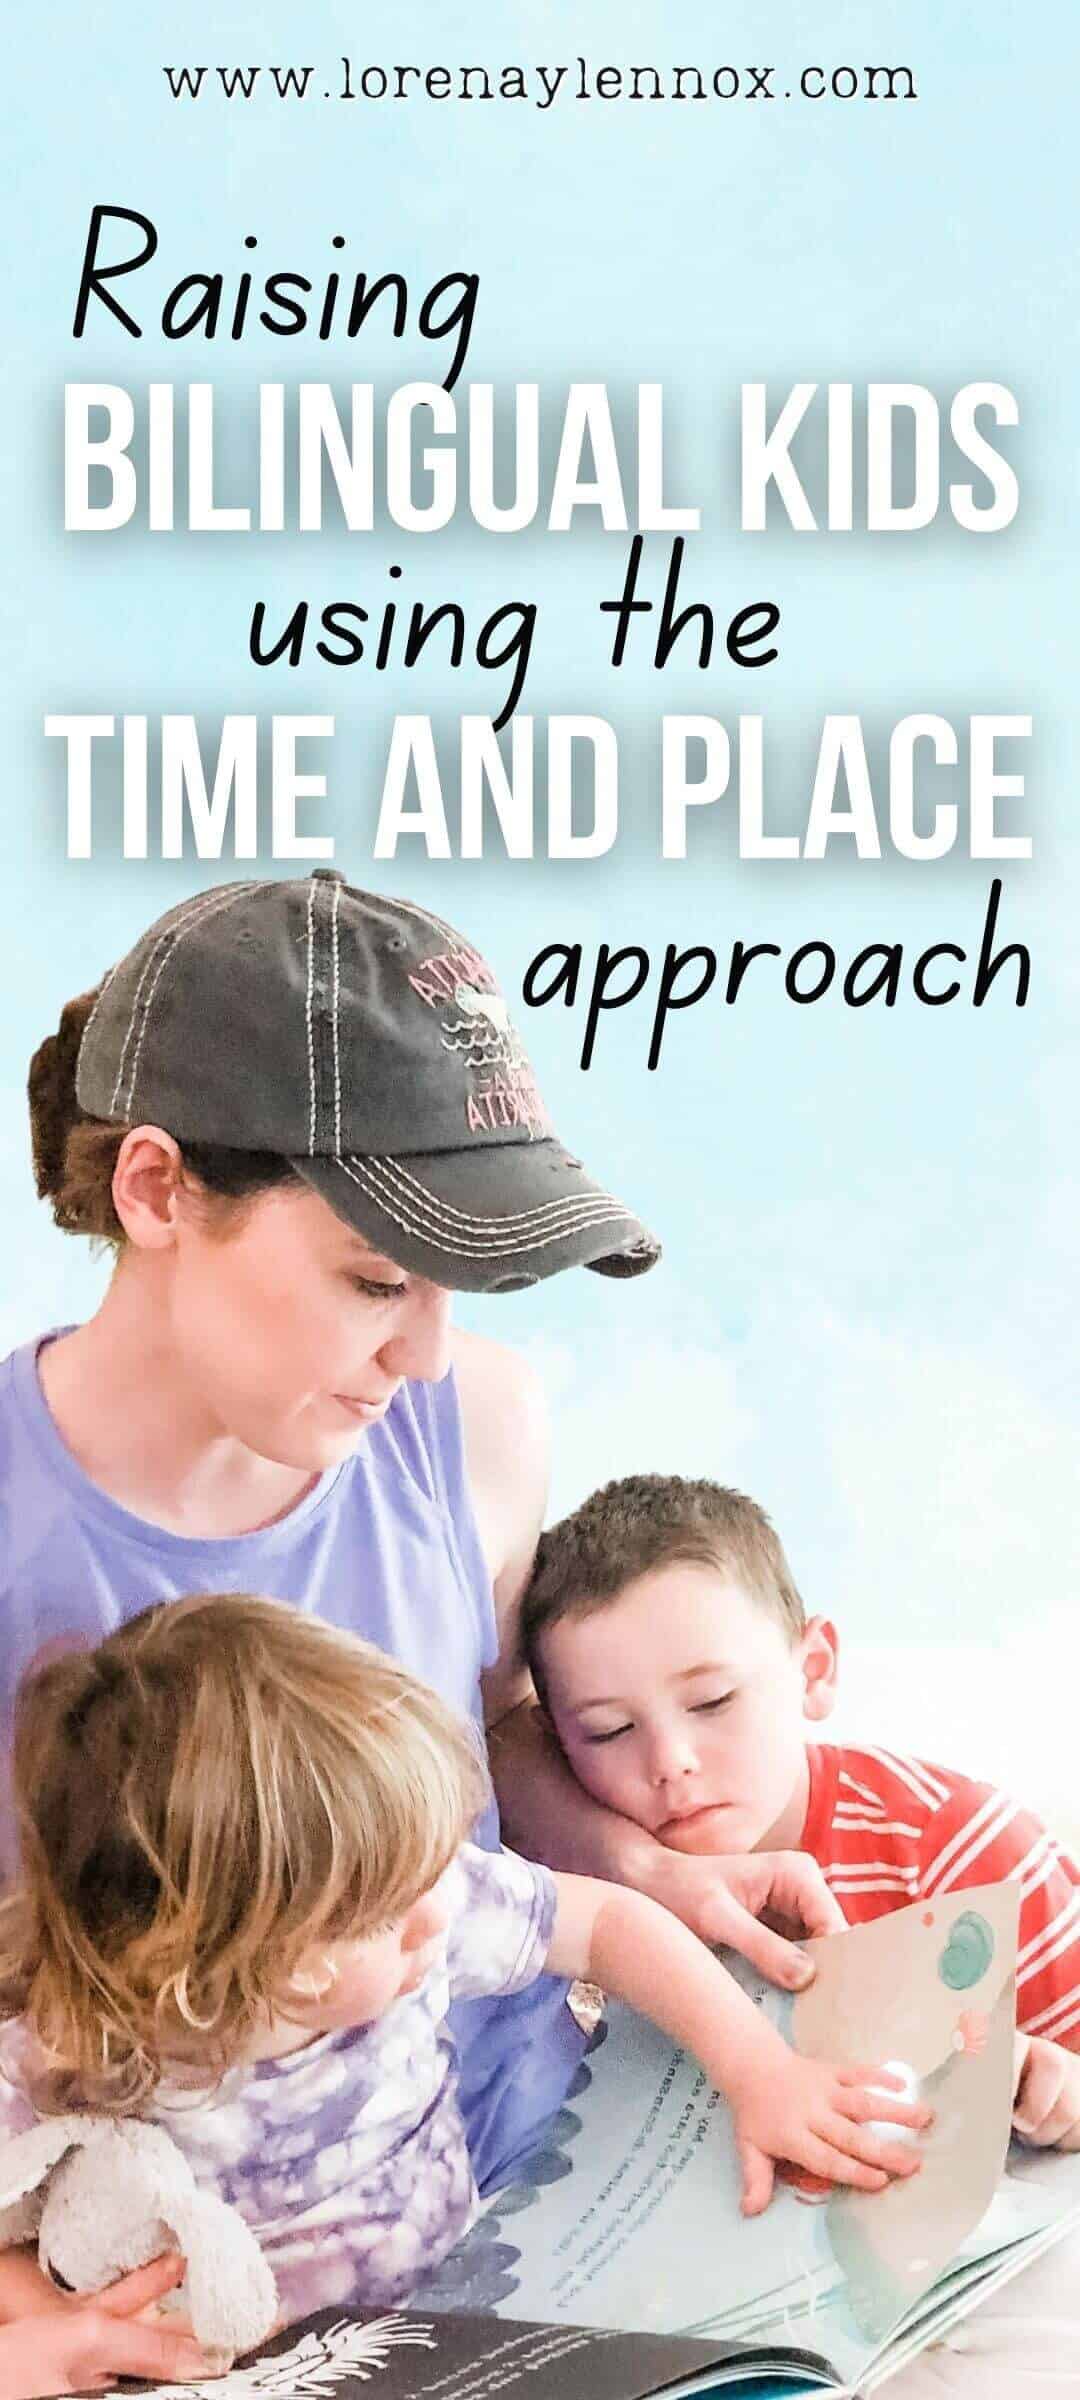 Tips on Using the Time and Place Bilingual Parenting Approach